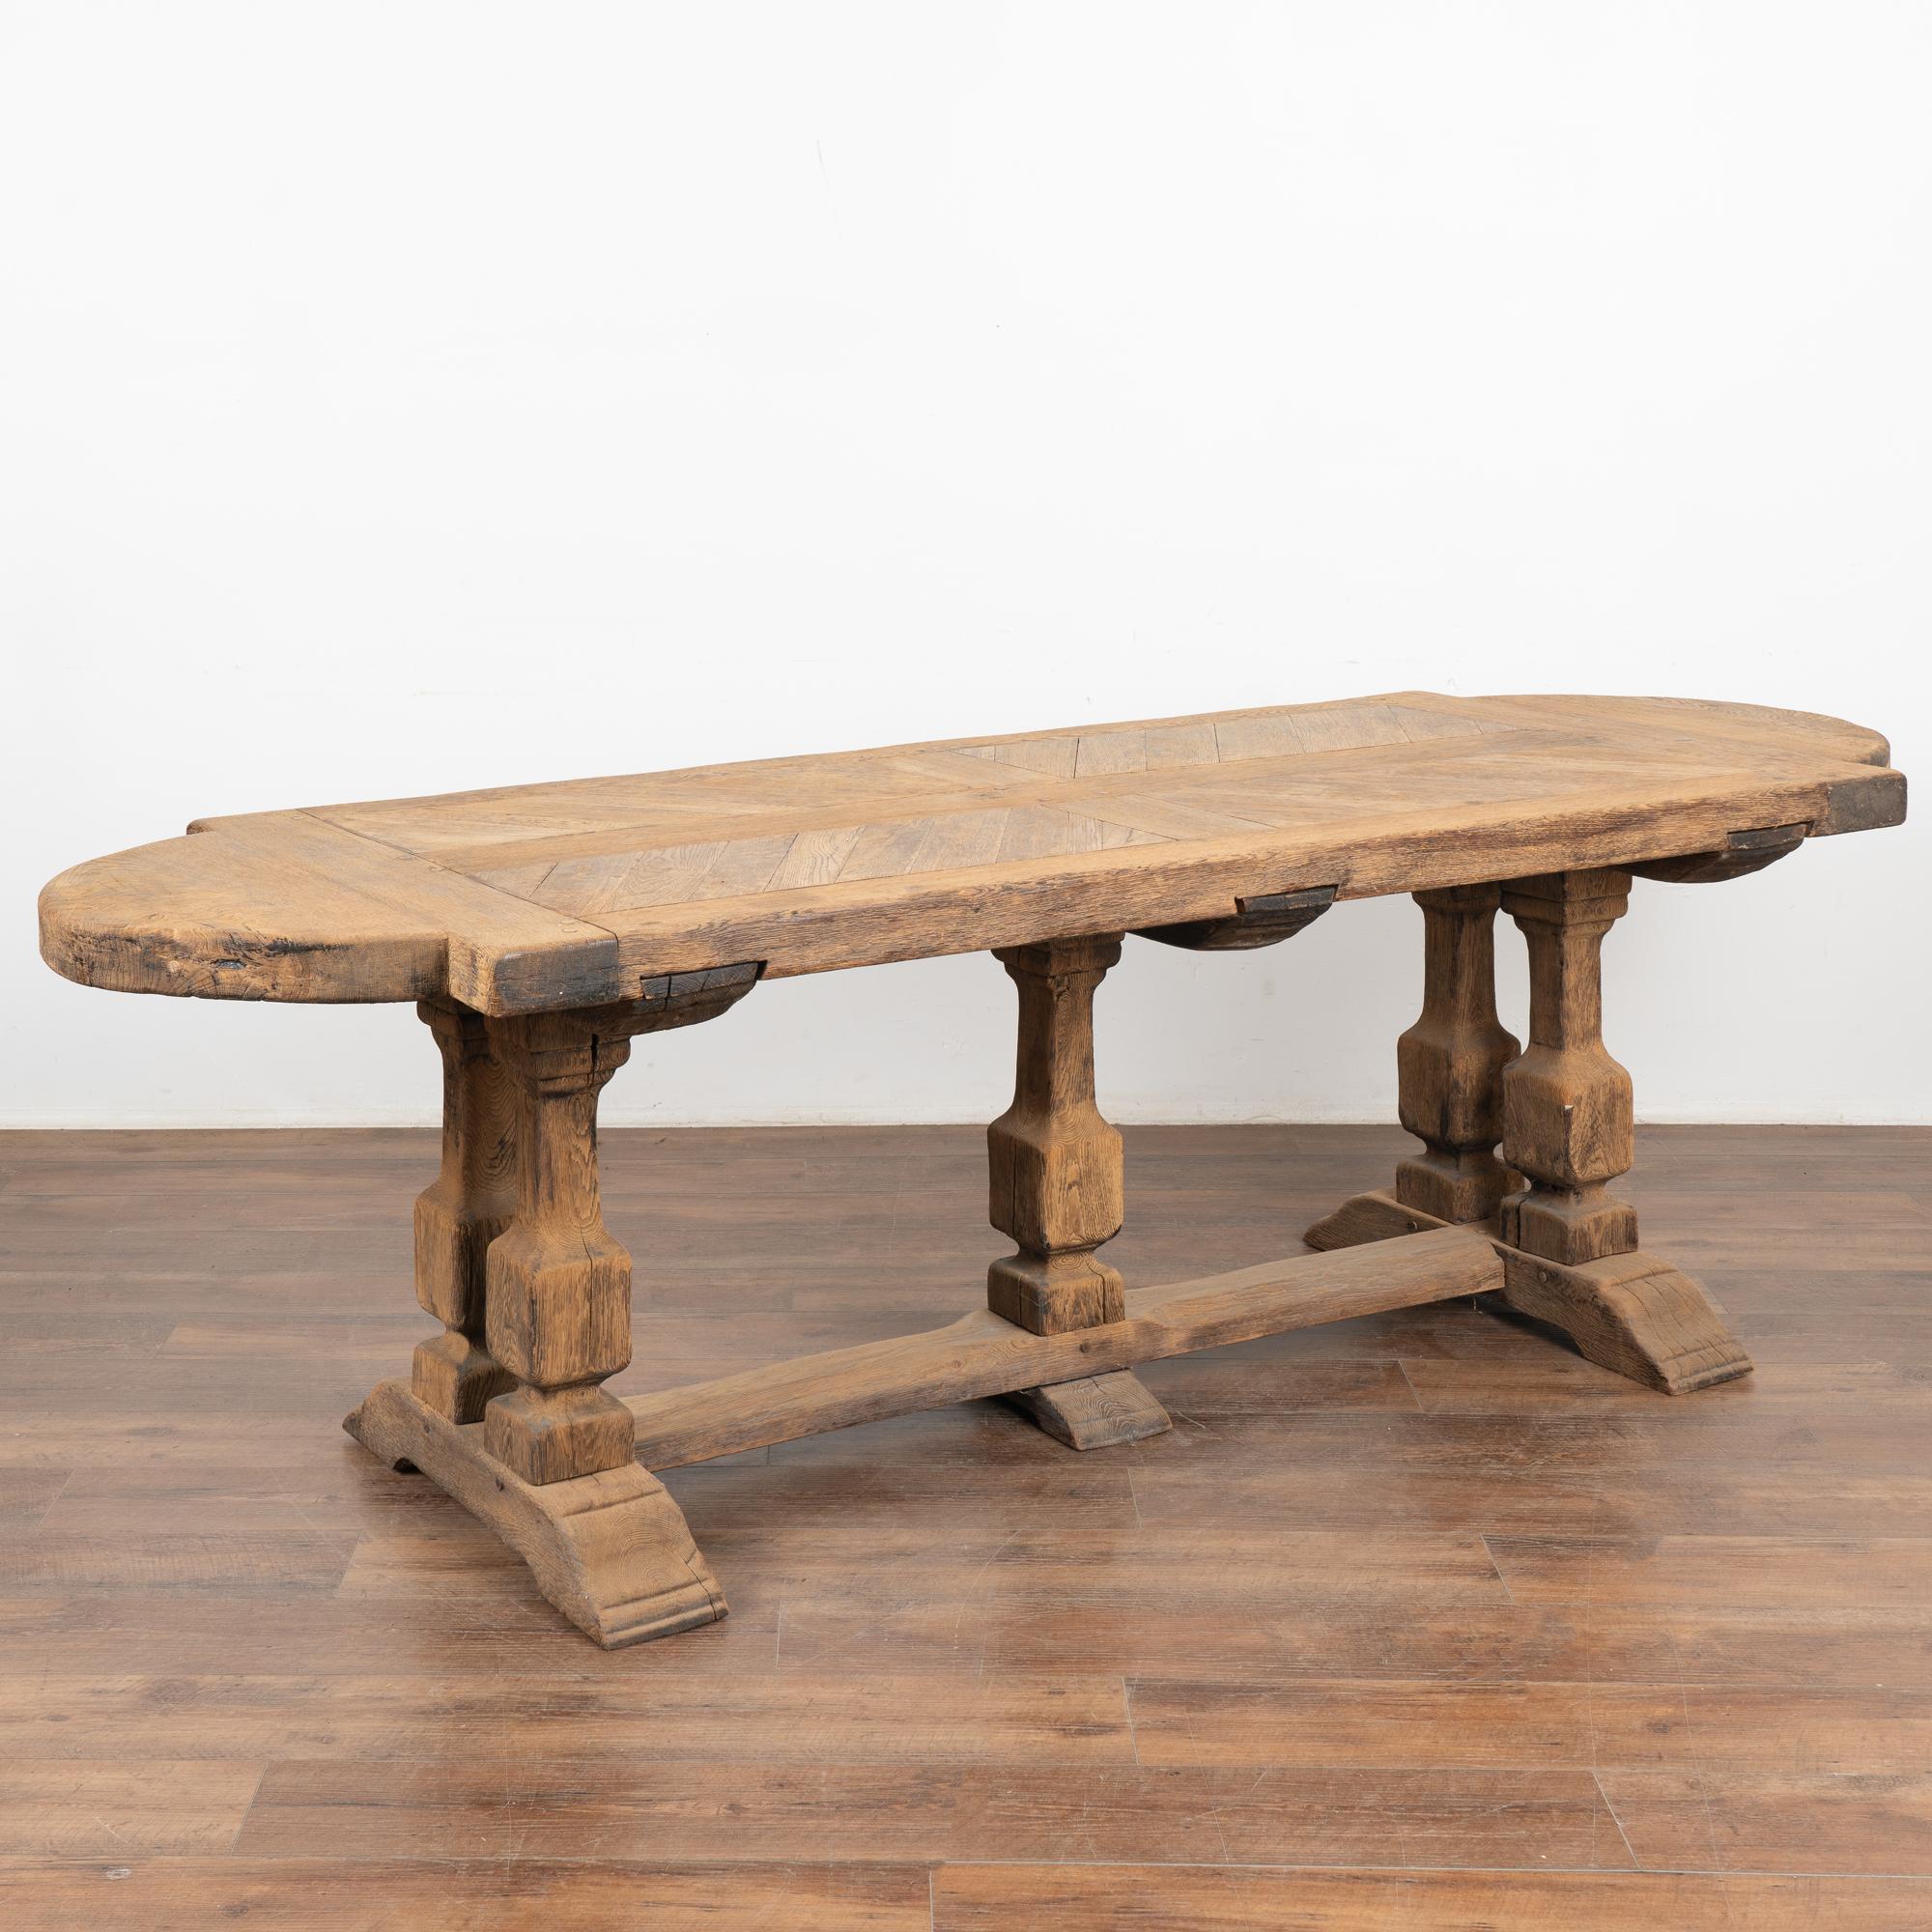 Large bleached oak dining table from France with impressive carved trestle base with heavy legs.
The original dark oak has been bleached, creating a fresh, lighter look for today's modern home. 
Note the intriguing pattern of oak in the heavy